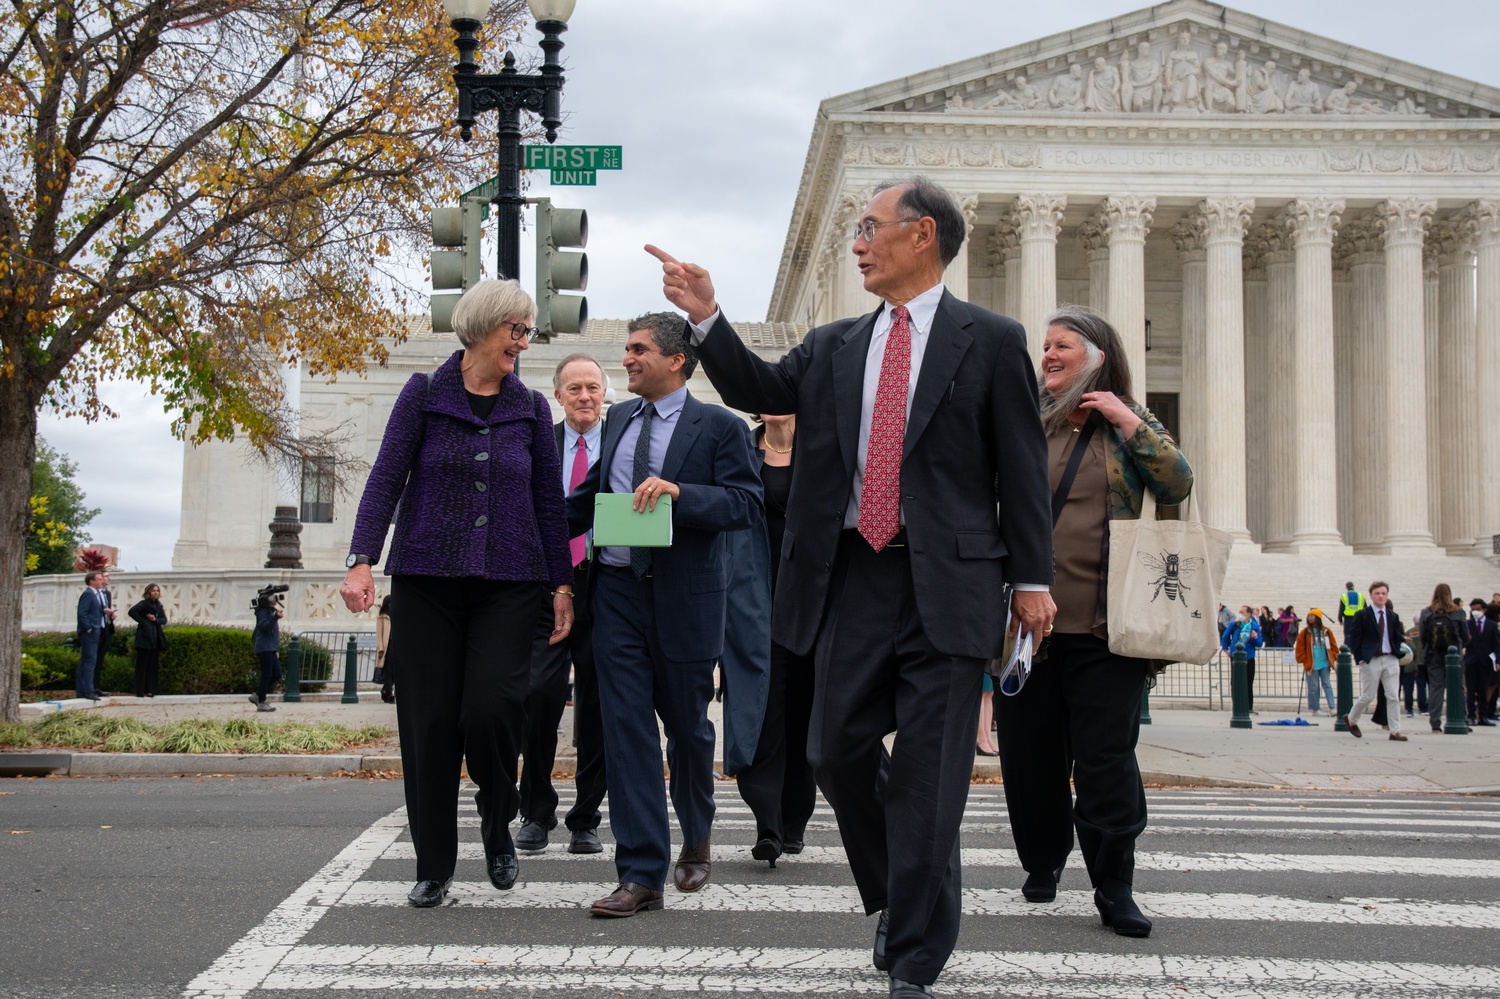 From left, former Harvard President Drew G. Faust, Dean of Admissions and Financial Aid William R. Fitzsimmons '67, Dean of the College Rakesh Khurana, and former Harvard Corporation Senior Fellow William F. Lee ’72 exit the Supreme Court on Monday.